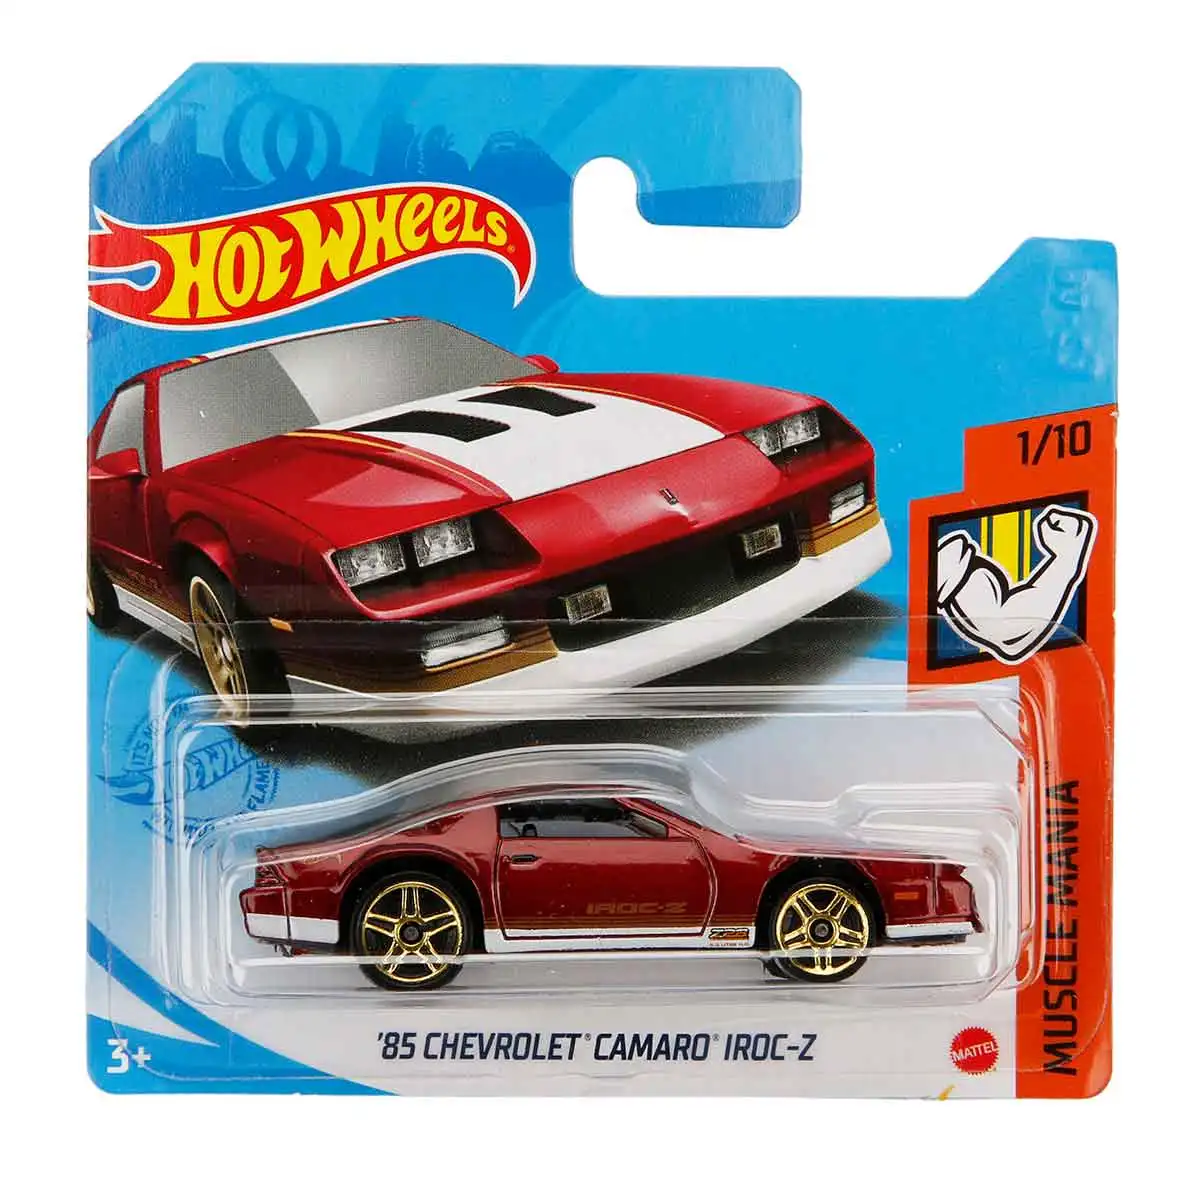 Hot Wheels Camaro Pack 2017 Camaro ZL1 and '85 Chevrolet Camaro Iroc-Z Collectable Diecast Toy Car Miniature 1:64